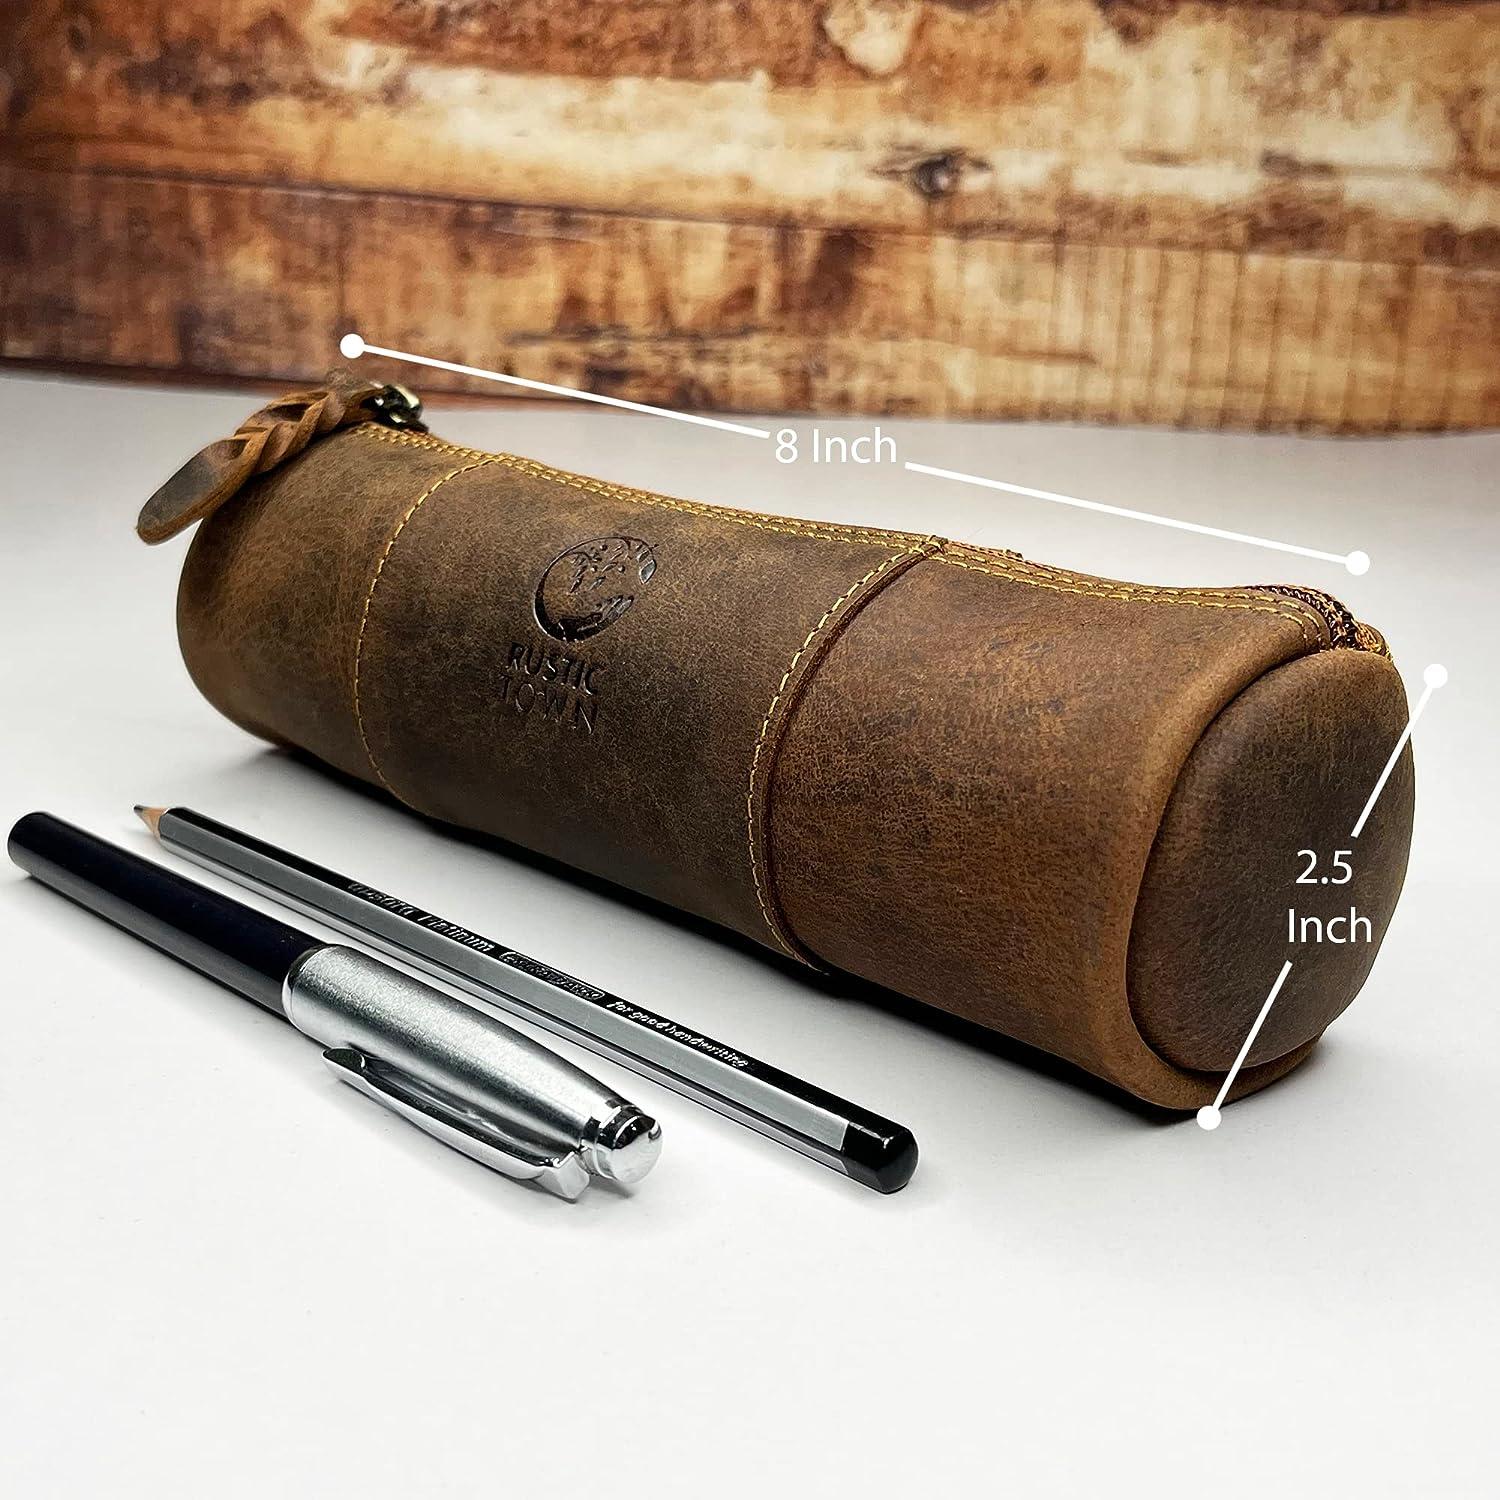 Vintage PU Leather Roll Up Pencil Case Classic Brown Foldable Pouch For  Paint Brush School Accessories College And Art WorkPurple